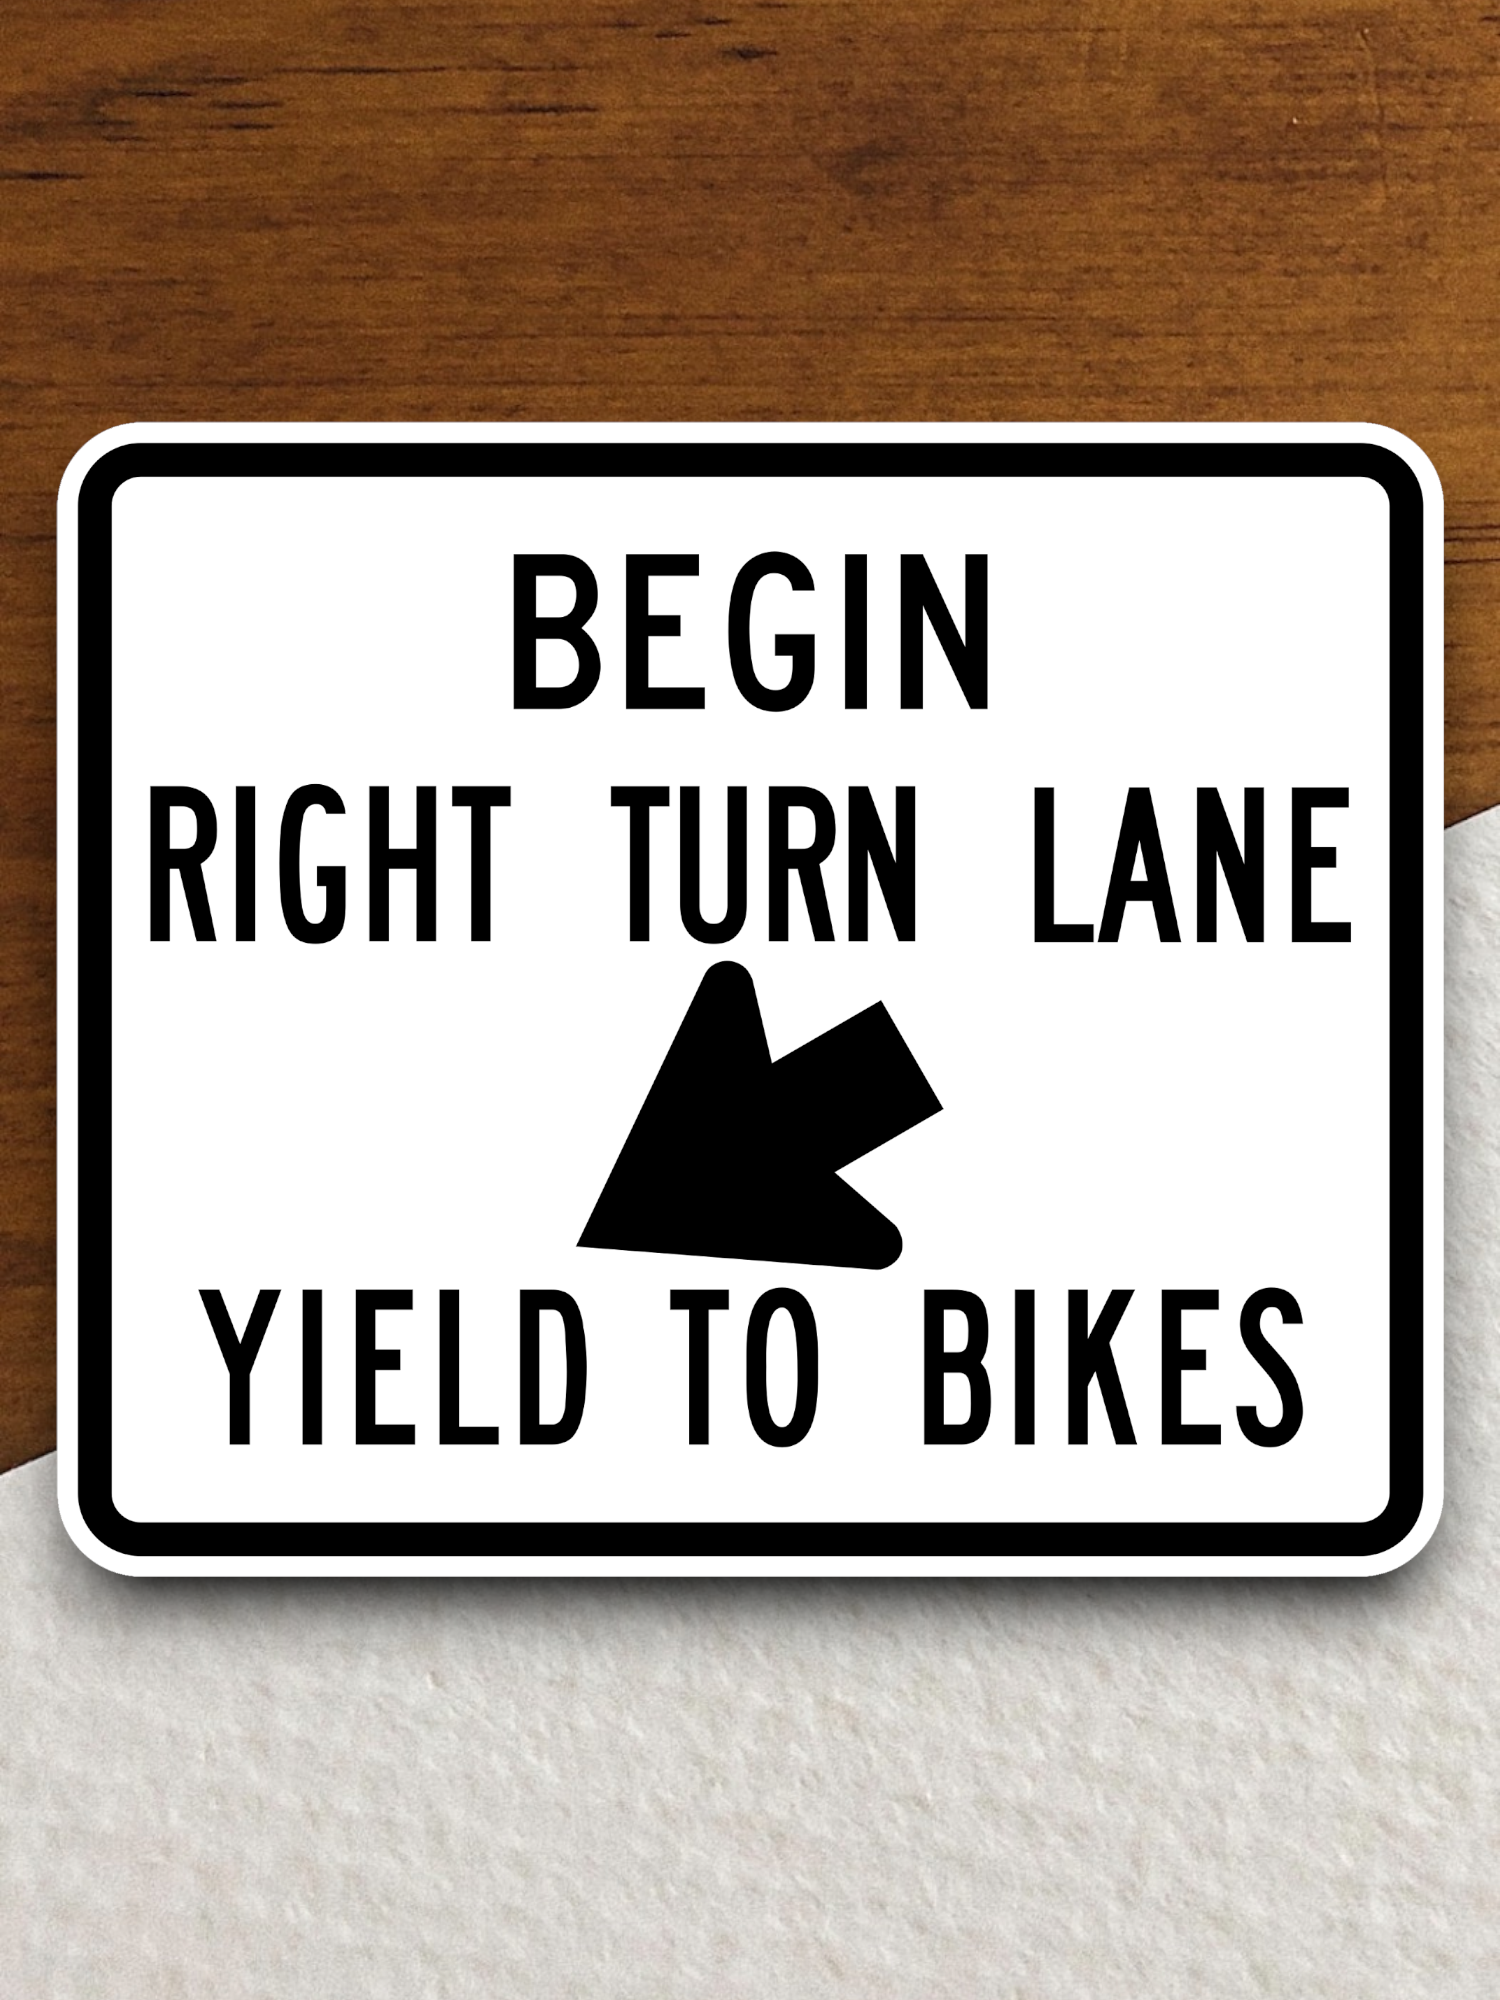 Begin right turn lane yield to bikes United States Road Sign Sticker